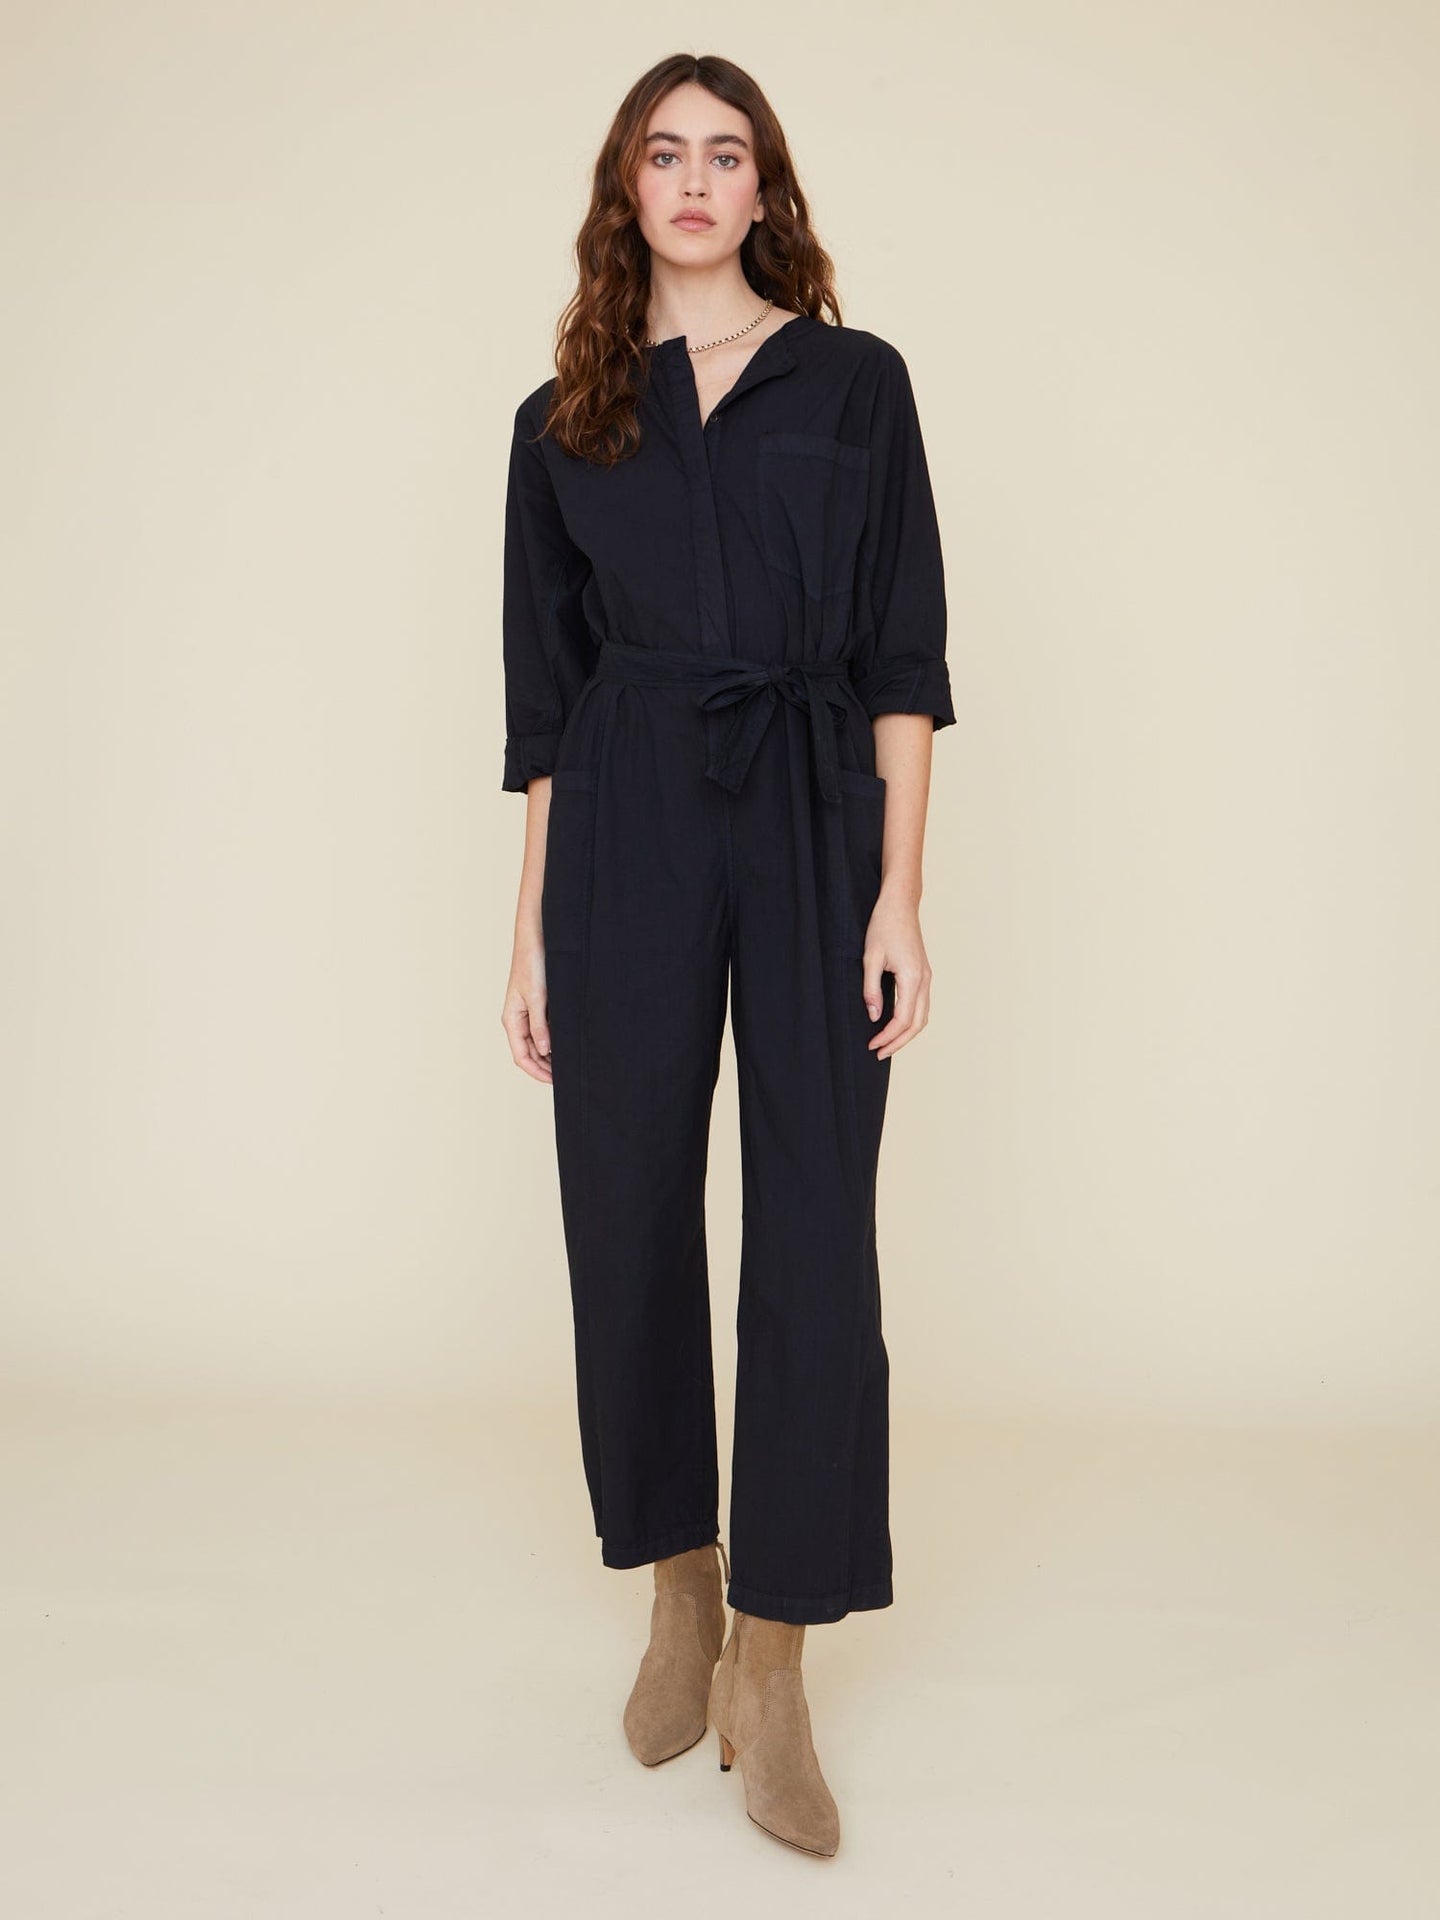 Xirena Kenton Jumpsuit in Black available at TNT The New Trend Australia